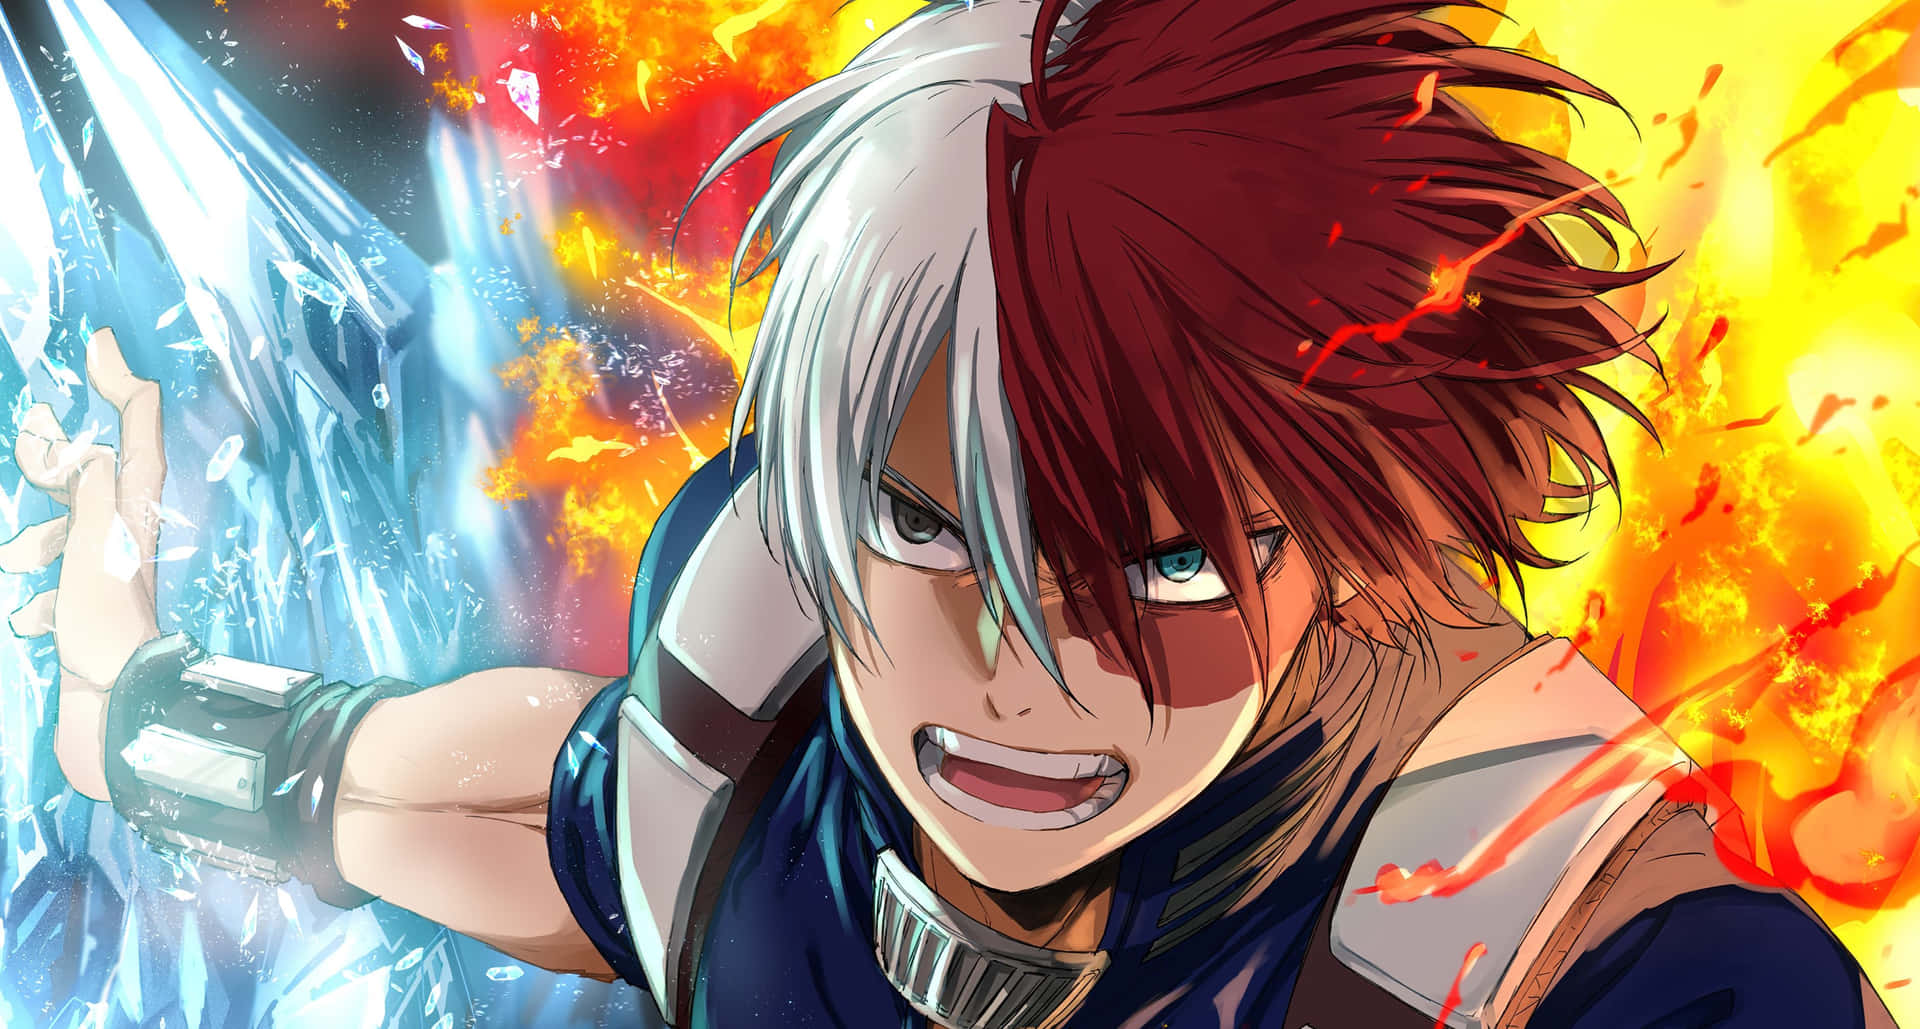 Live life with the fire of your passion - Todoroki